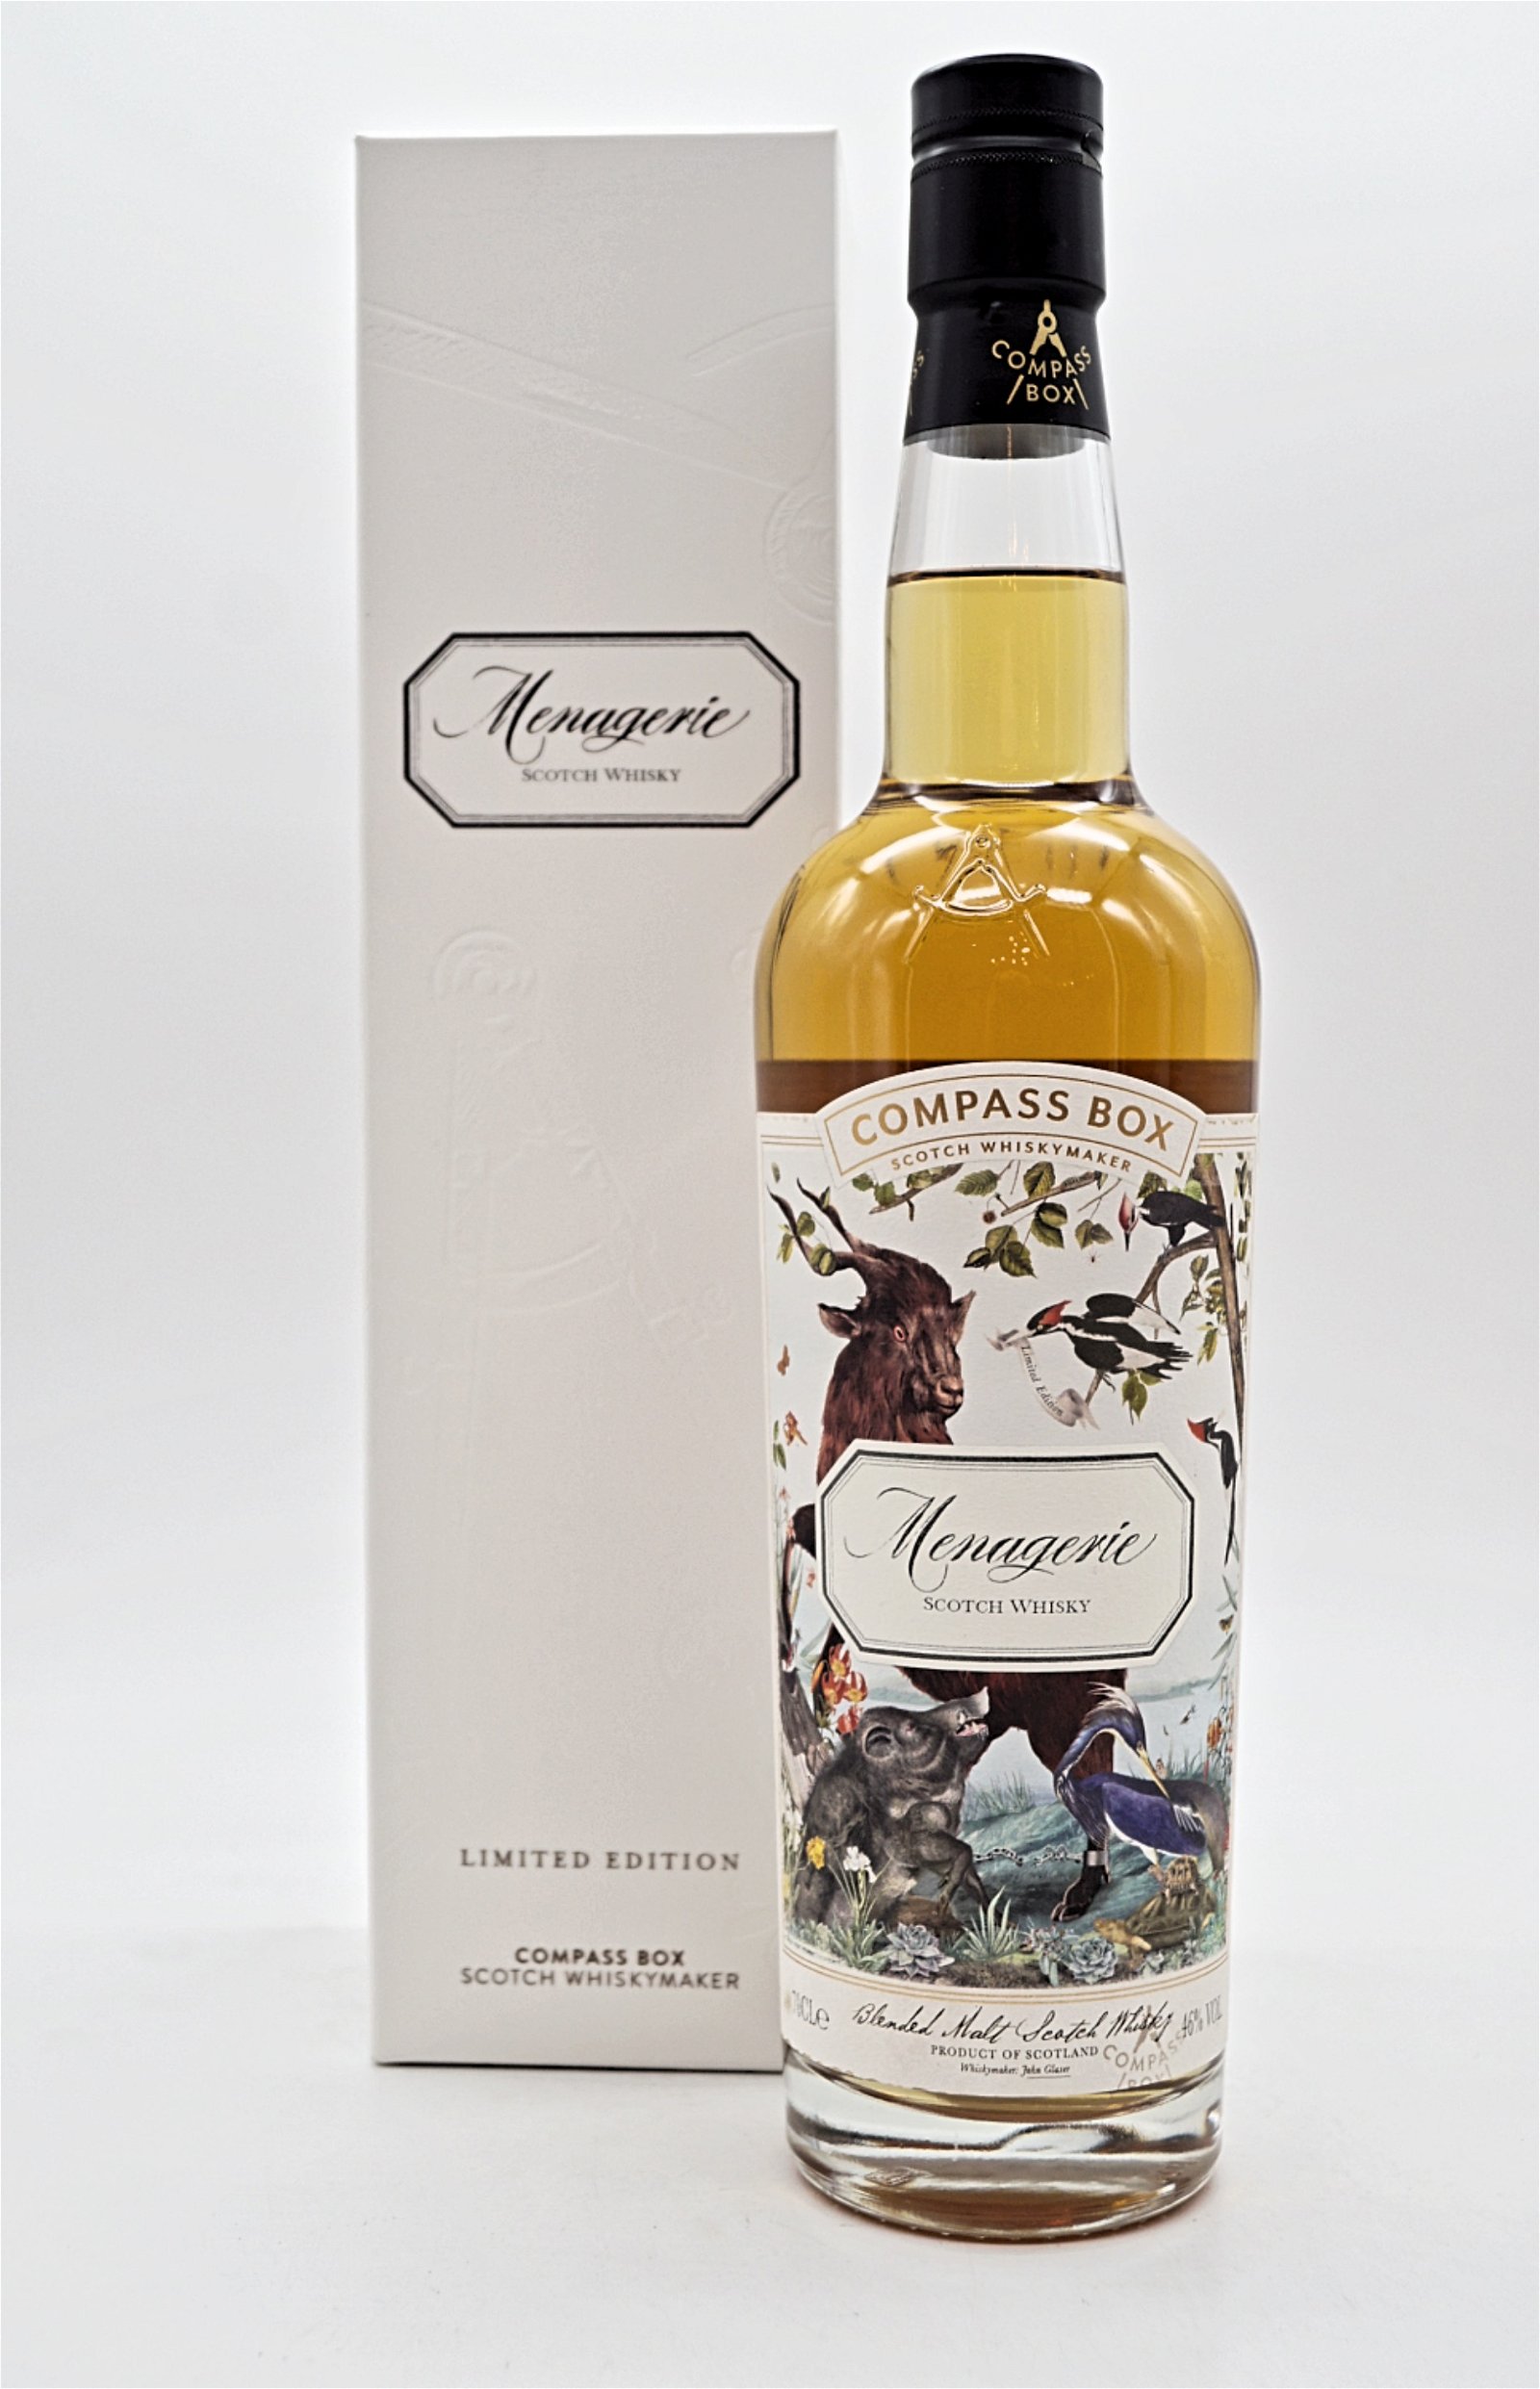 Compass Box Menagerie Limited Edition Blended Malt Scotch Whisky